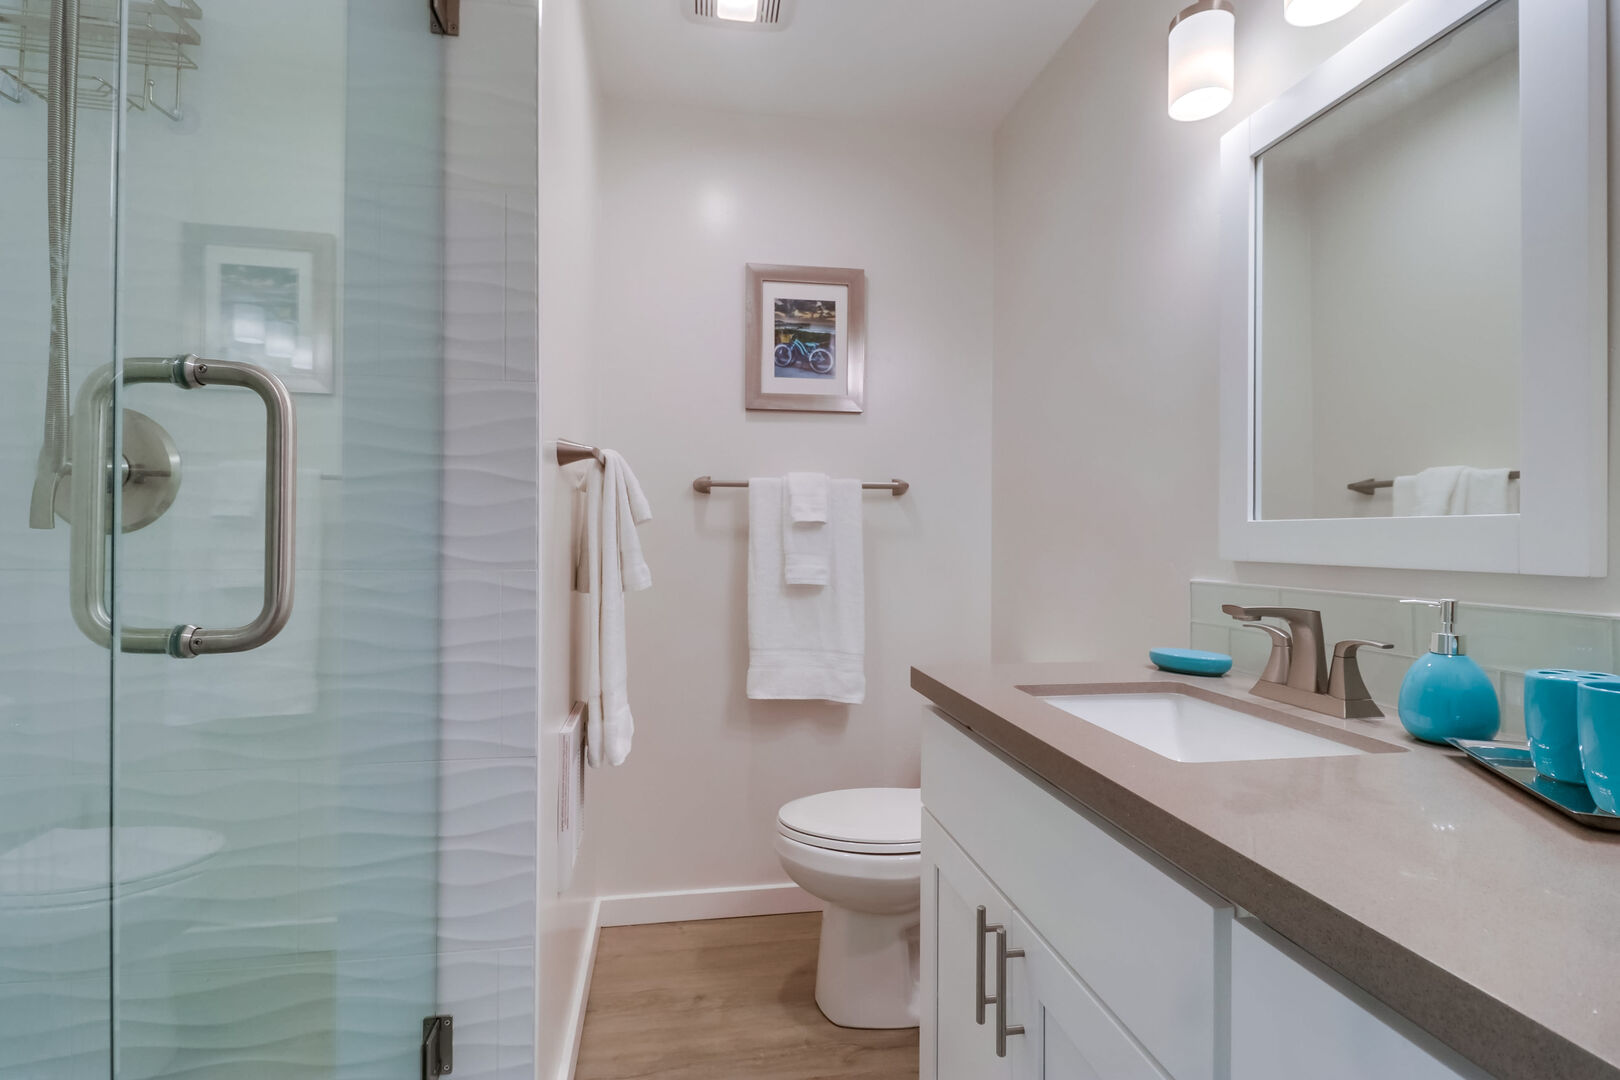 Guest bathroom with large single vanity, toilet, ample storage space and walk-in shower. Please note: the shower does have a small step to get in